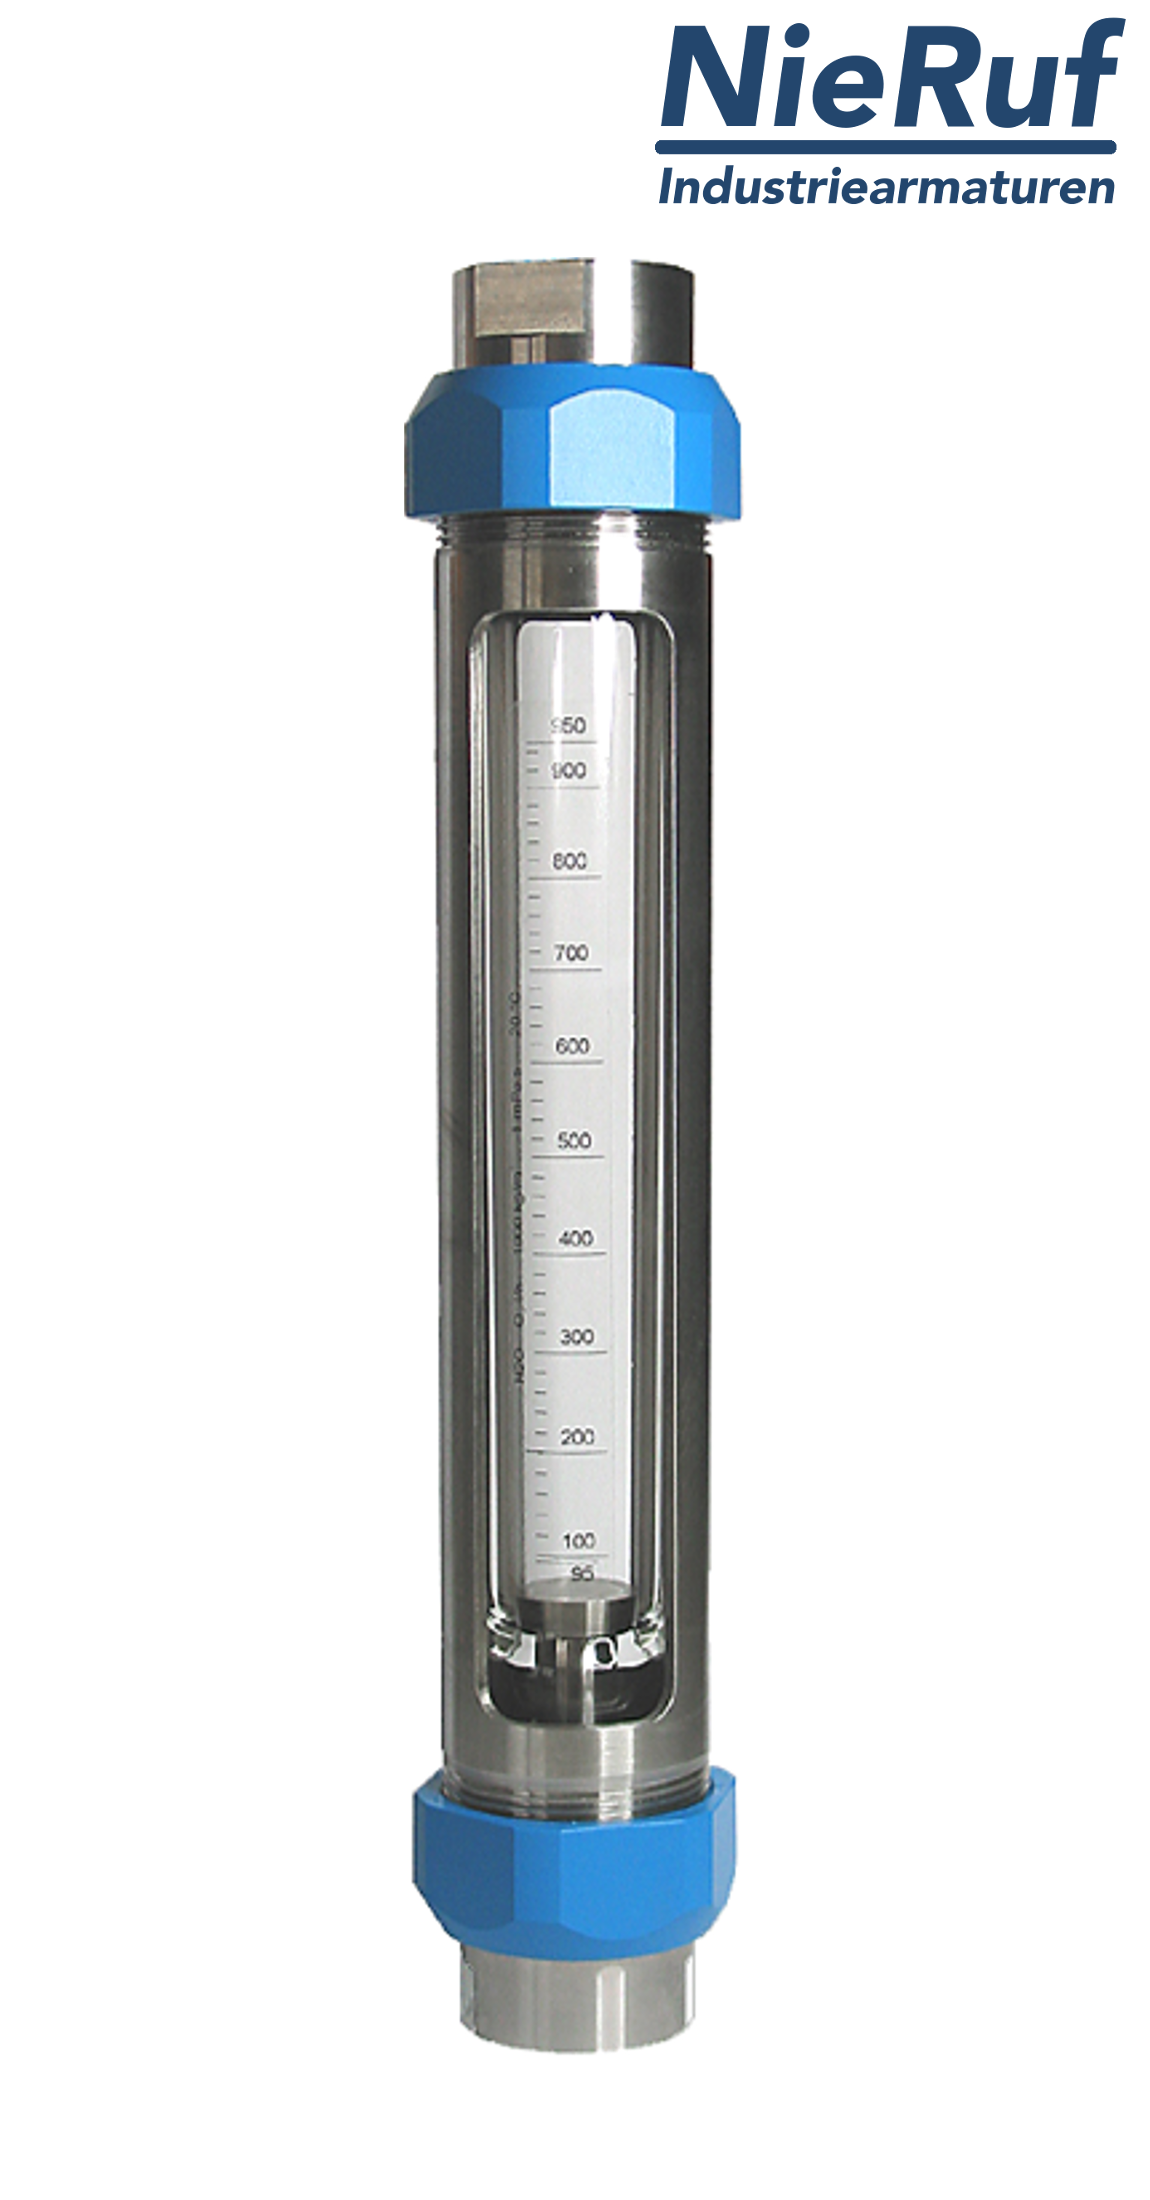 Variable area flowmeter stainless steel + borosilicate 1/4" inch 1.0 - 10.0 l/h water FKM